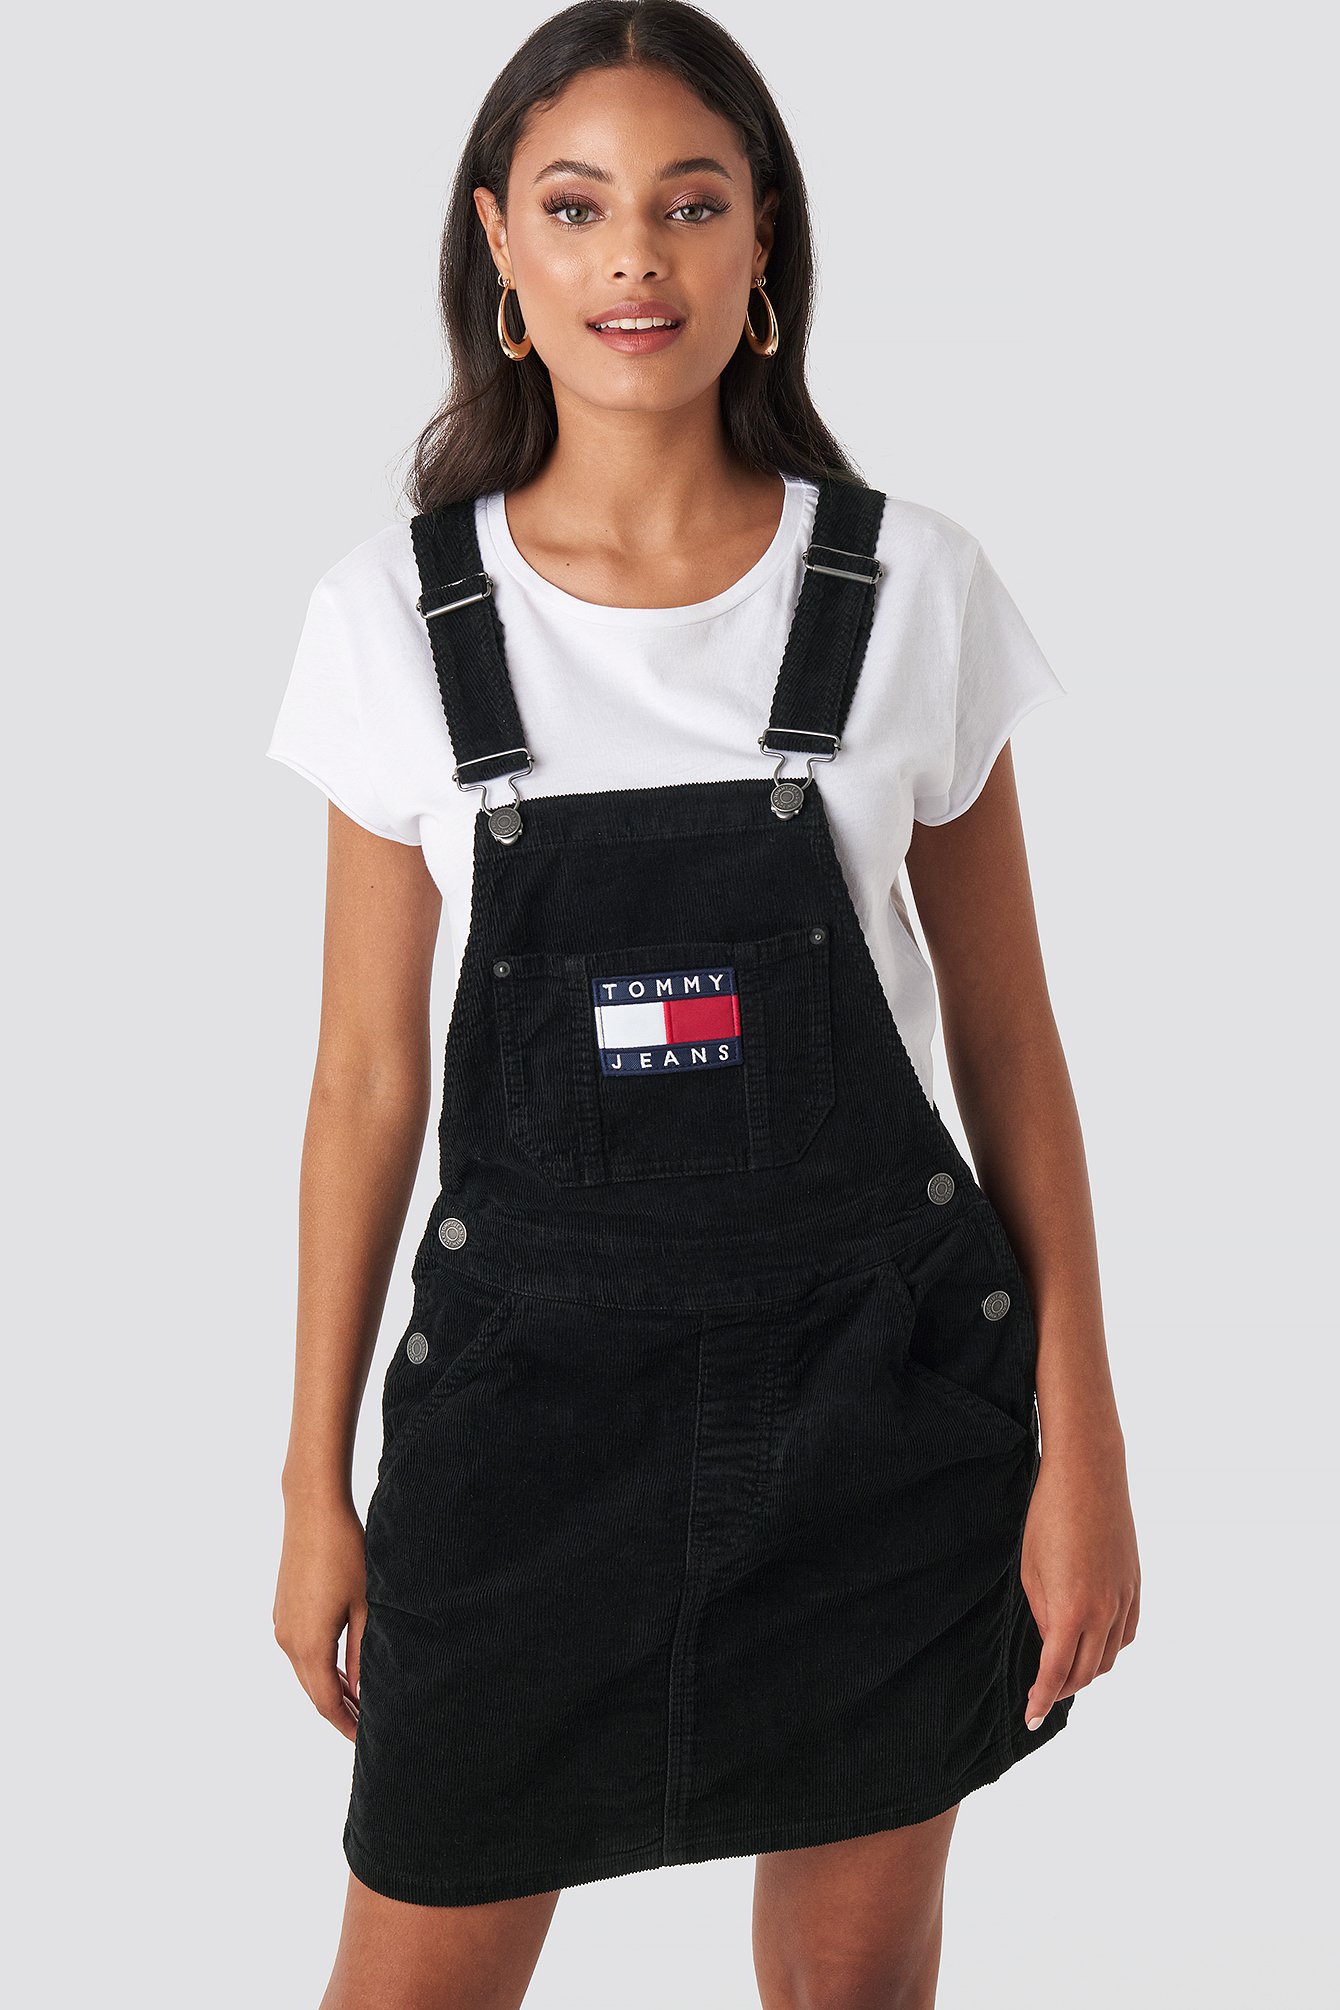 tommy jeans dungarees mens